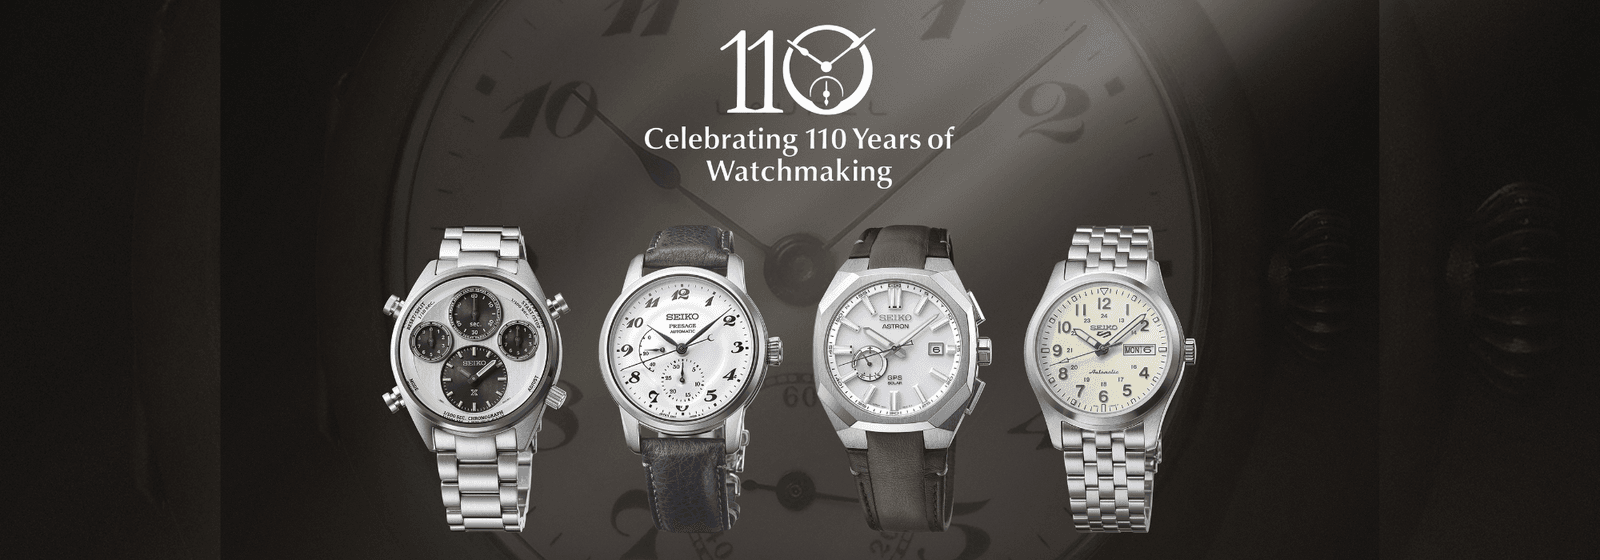 Seiko - 110 Years Of The Laurel With Commemorative Timepieces